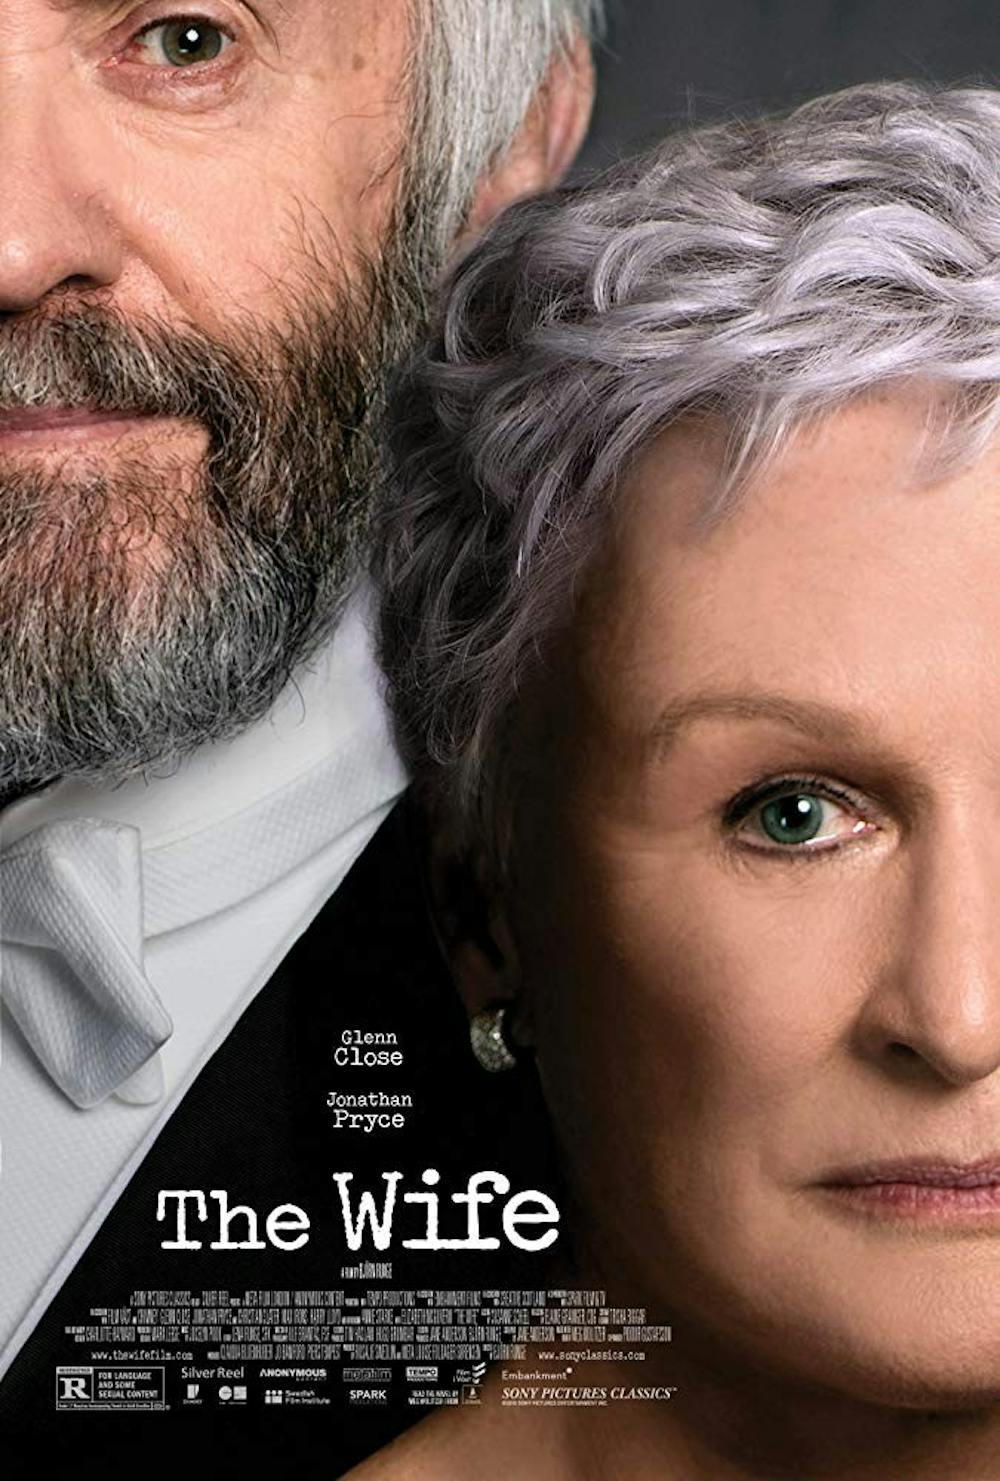 <p>It's a slow build, but the dramatic tension of "The Wife," fostered by Glenn Close's incredible performance, makes the depicted relationship gripping.</p>